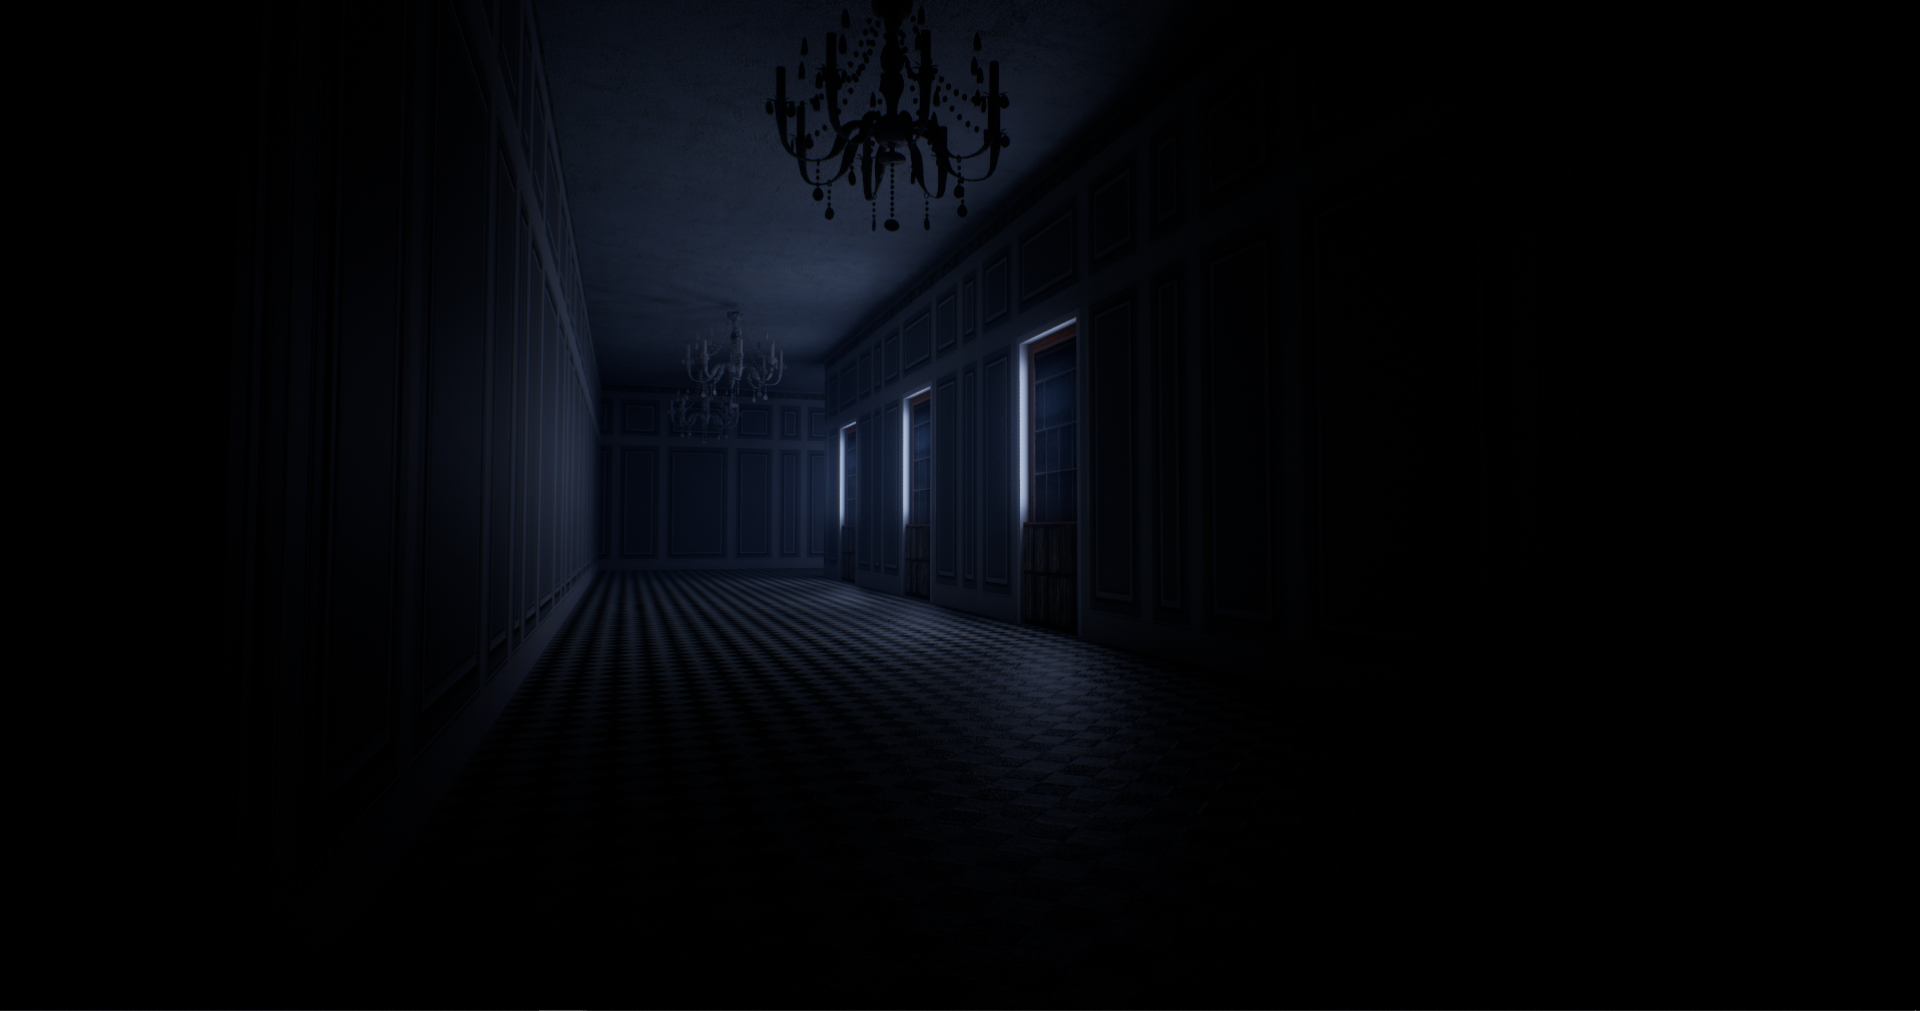 Eyes The Horror Game Remastered. Old PC-version 1.5! 